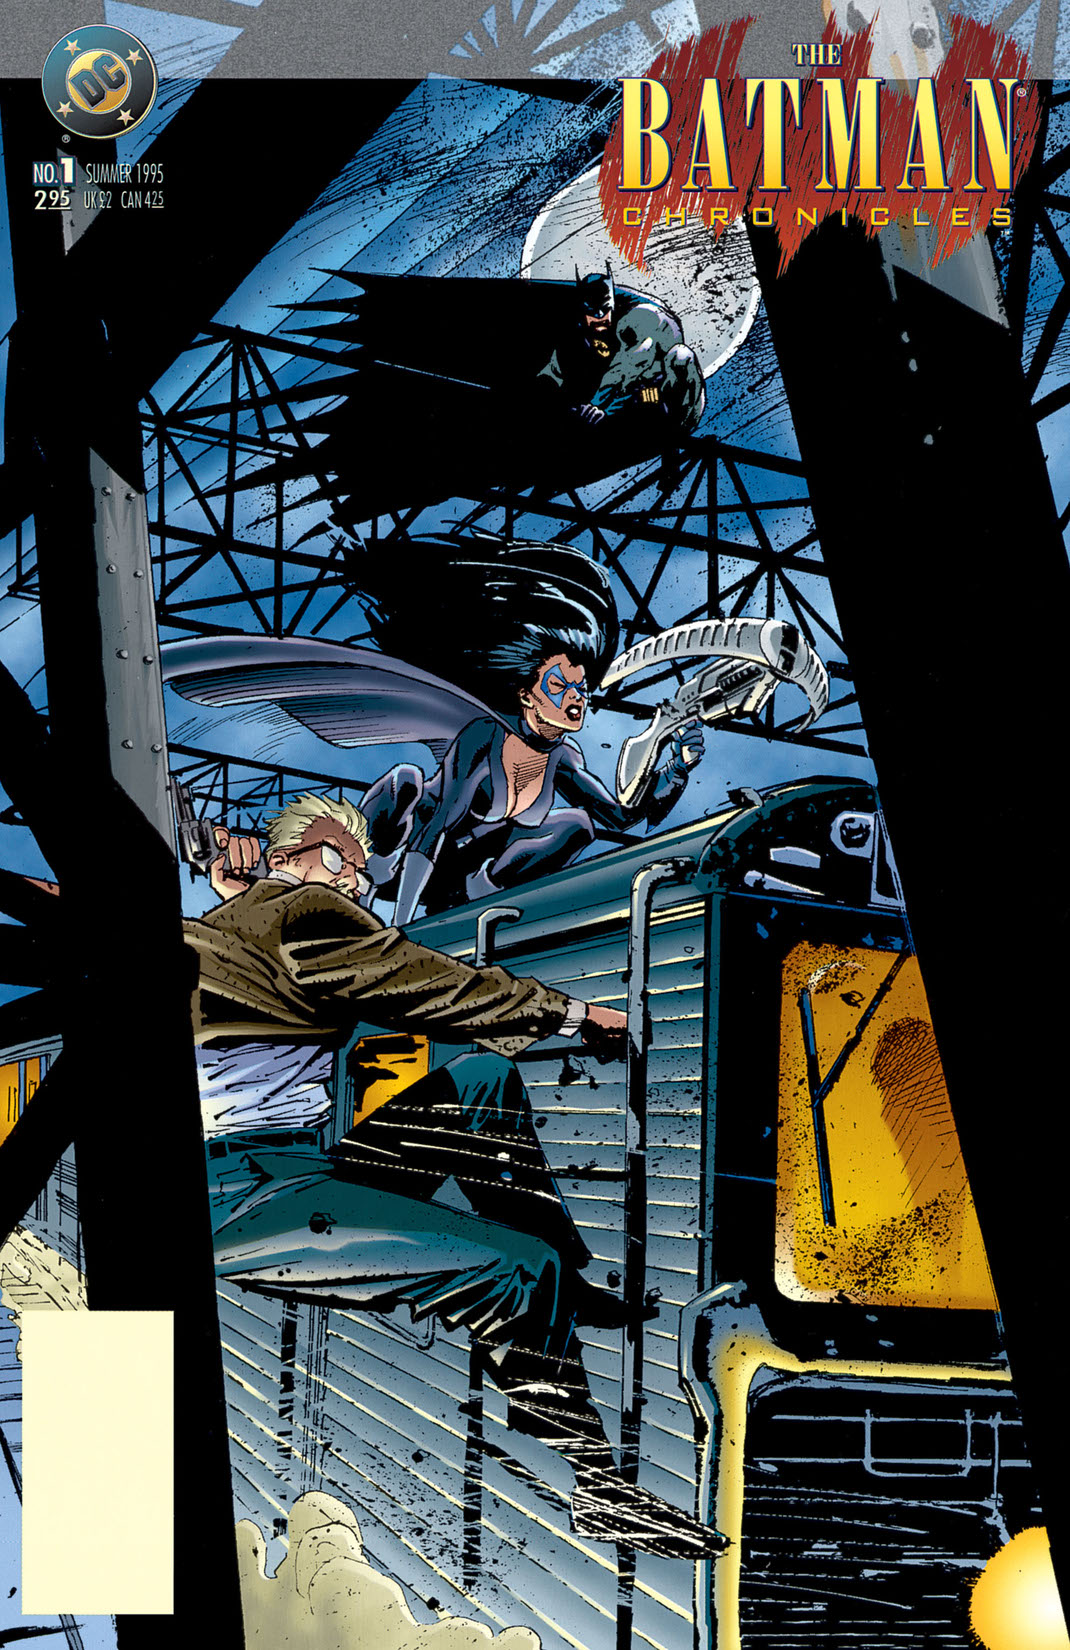 The Batman Chronicles #1 preview images